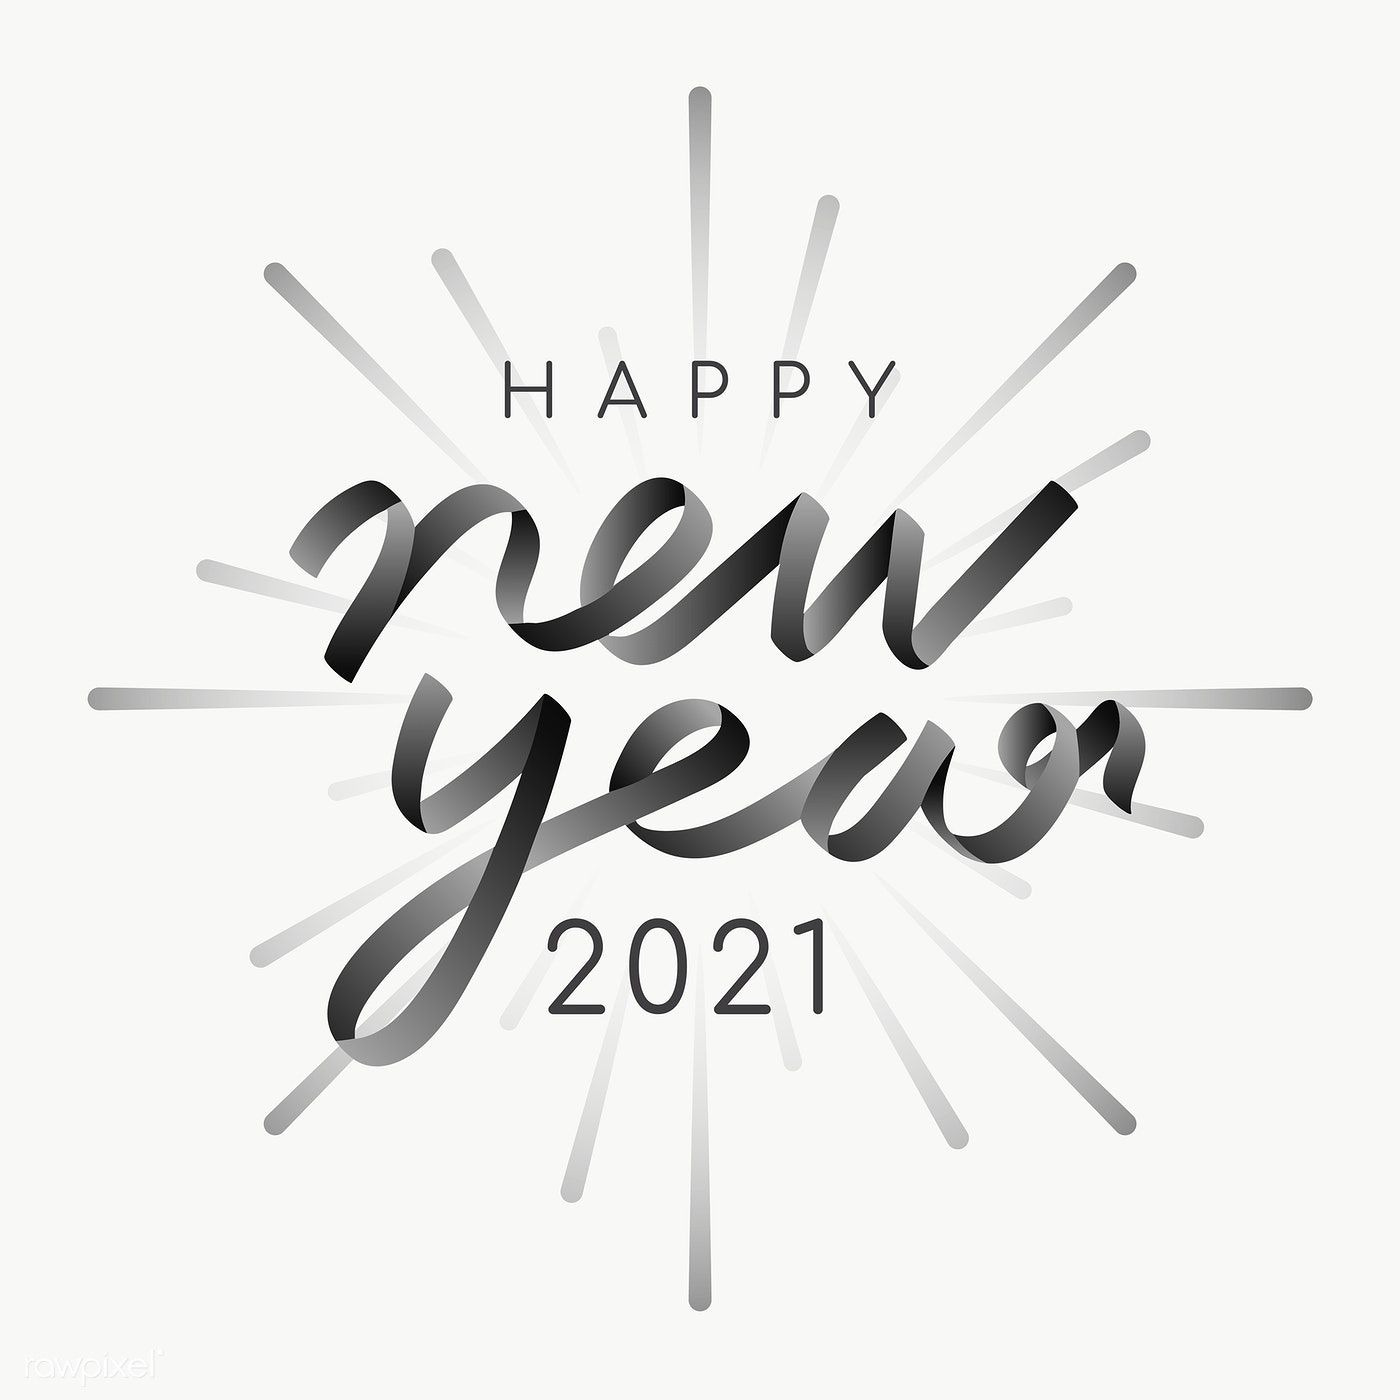 Happy New Year 2021 transparent png. free image / NingZk V. New year card design, Happy new year image, Happy new year picture